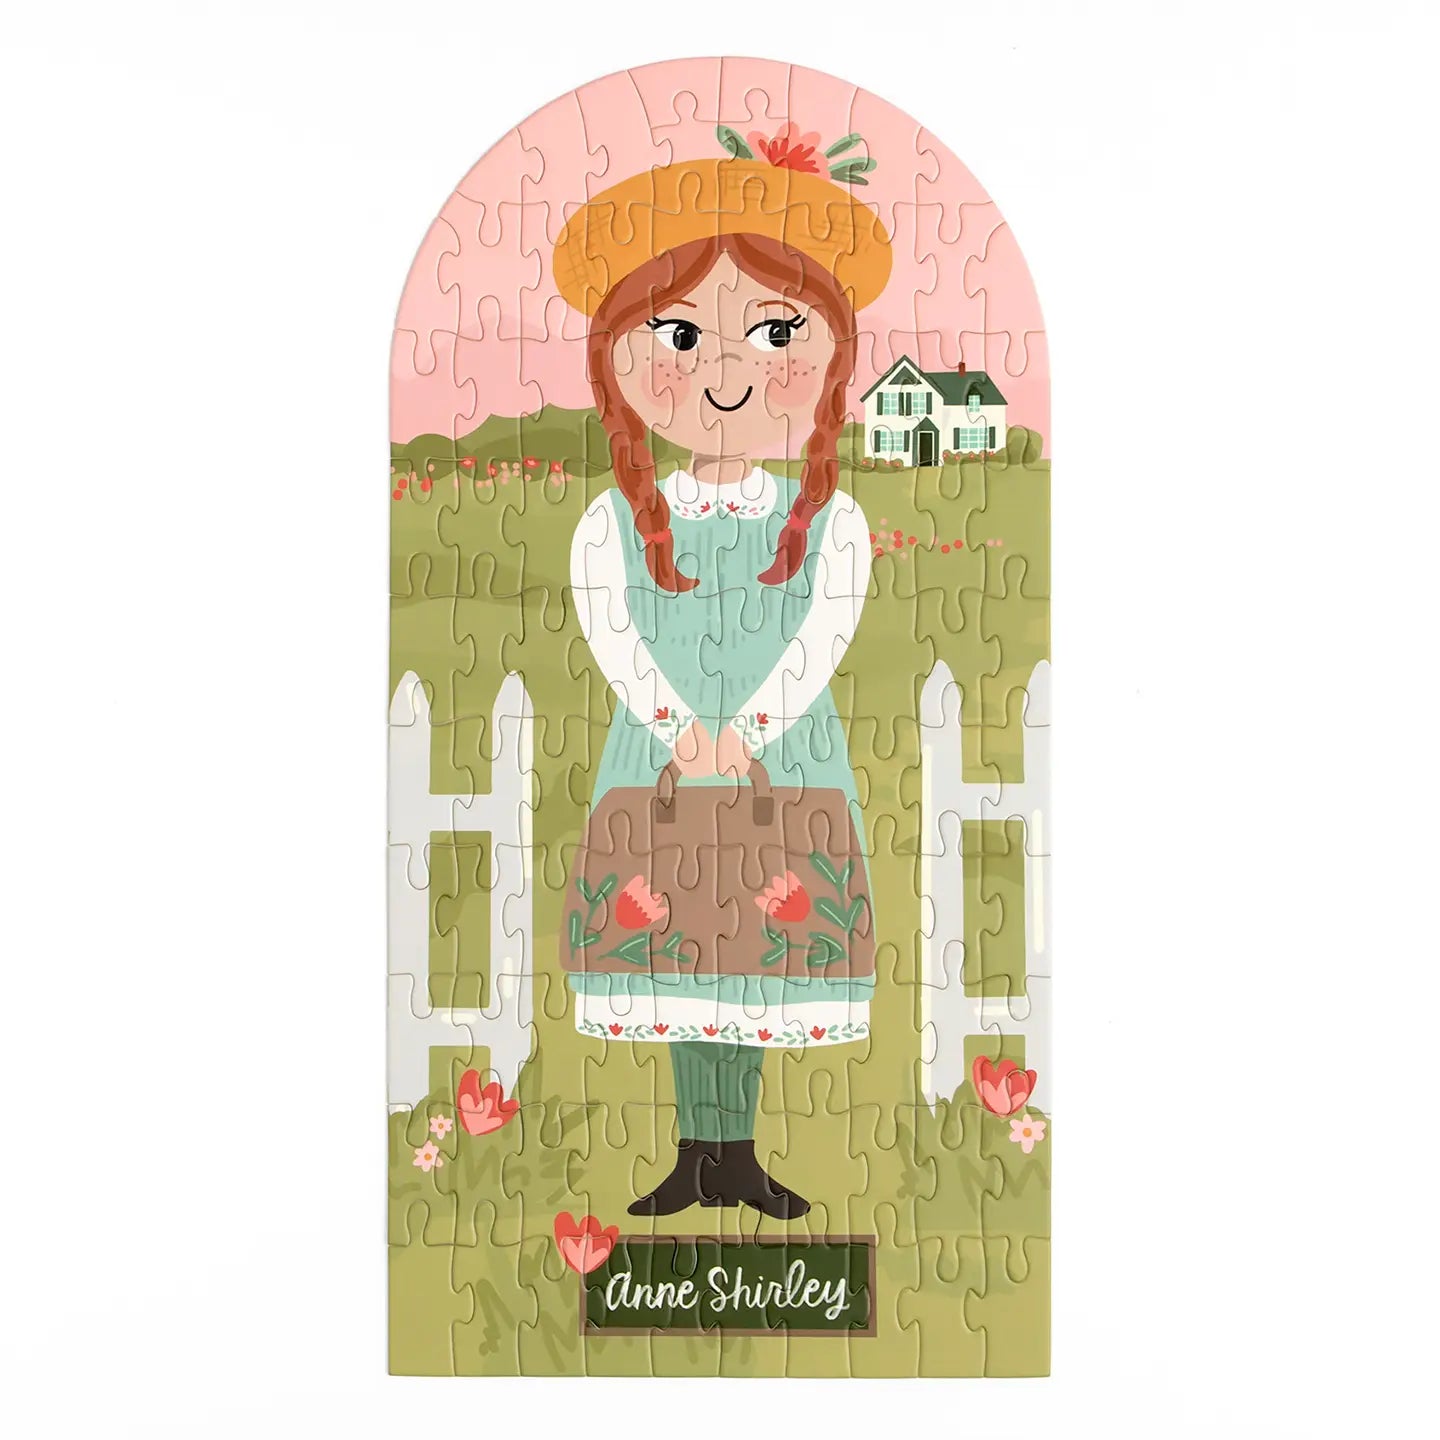 Anne of Green Gables Anne Shirley Puzzle